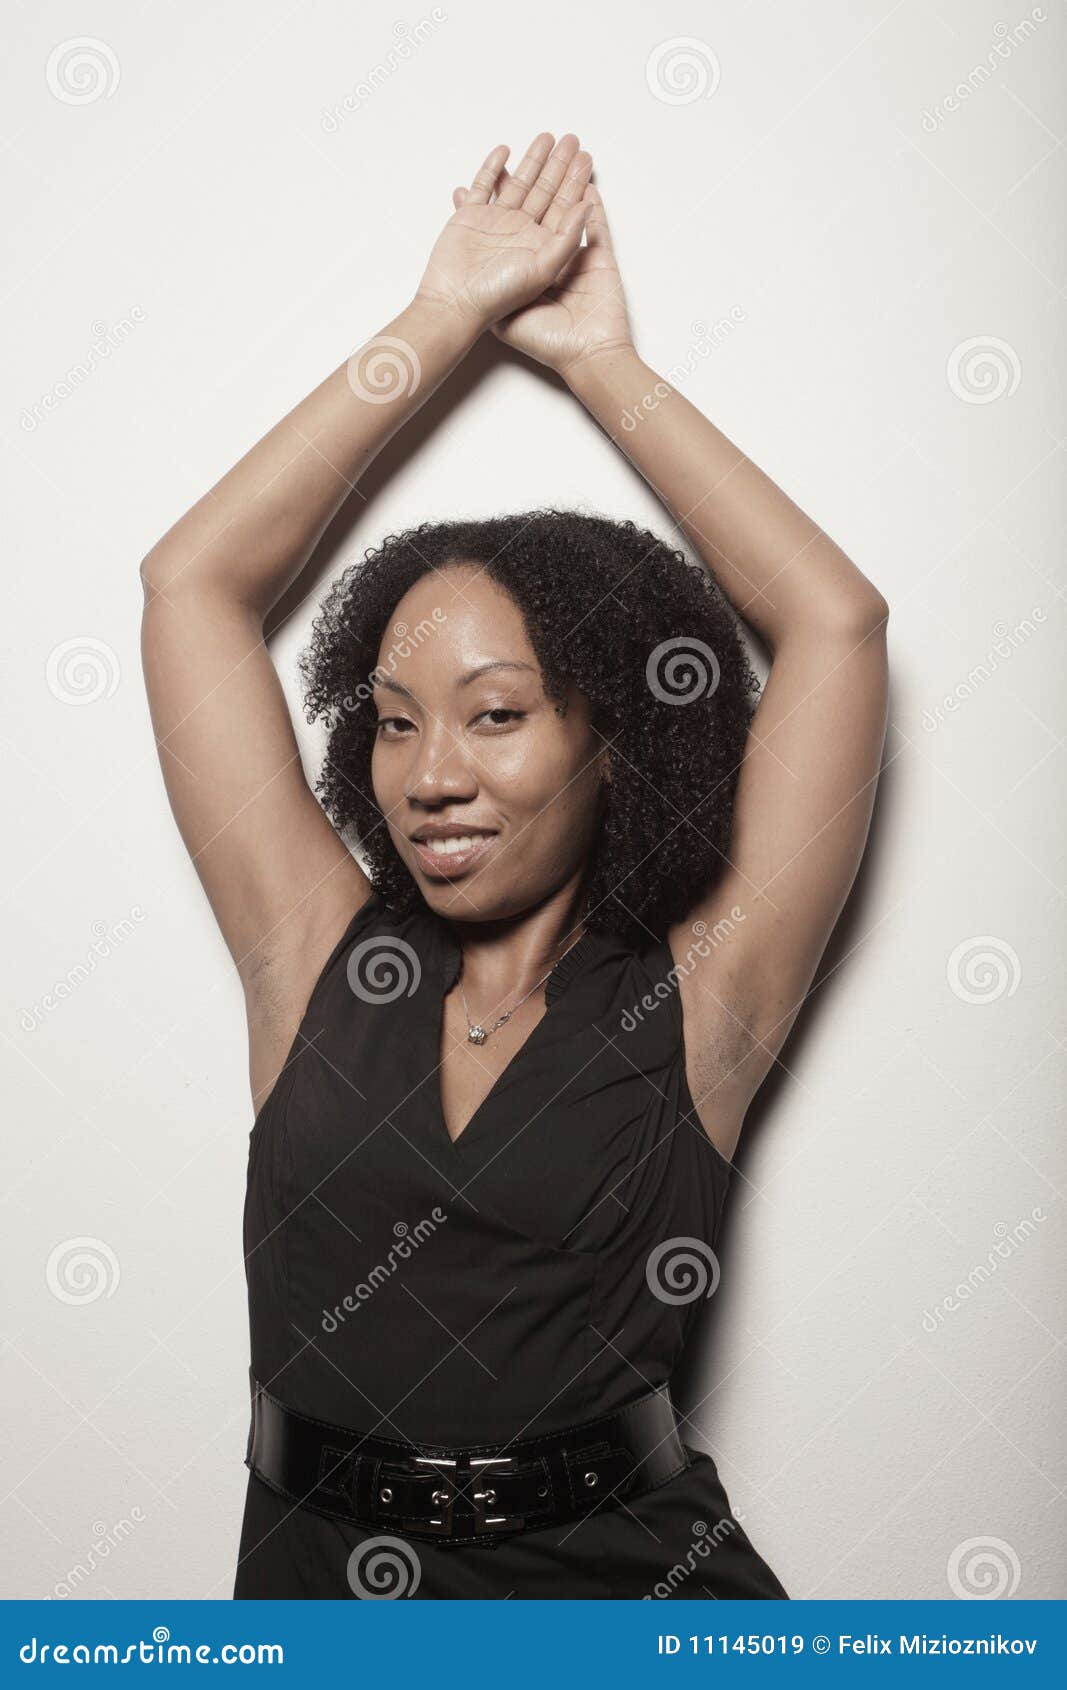 https://thumbs.dreamstime.com/z/woman-posing-her-arms-above-her-head-11145019.jpg